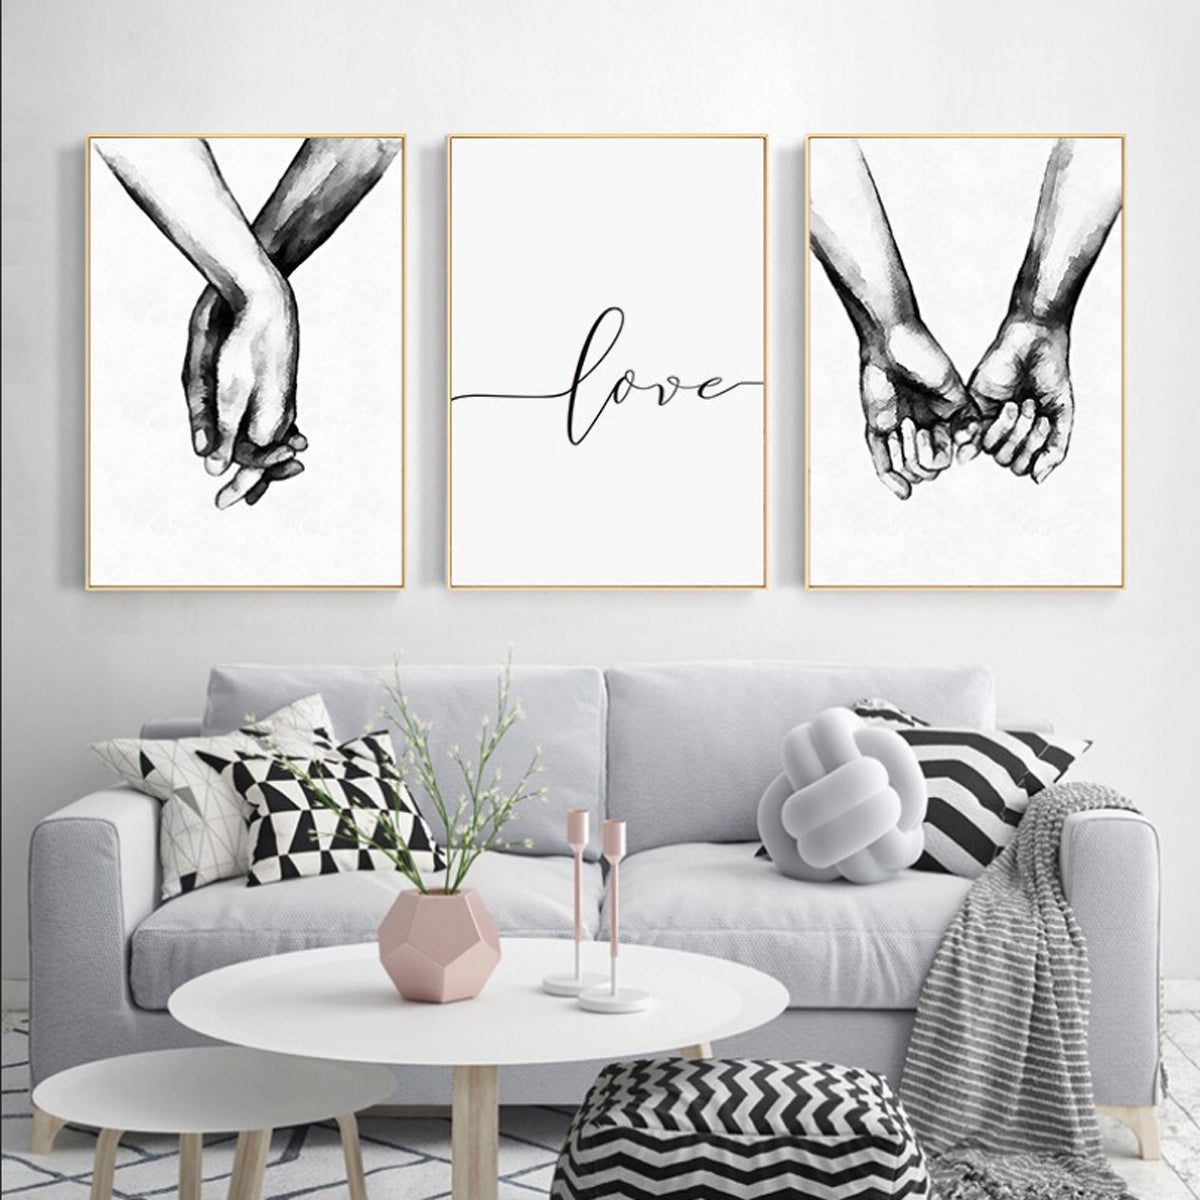 Canvas / di - / motifs Poster Loving in Love several – - Hands Traumpreisfabrik TPFLiving